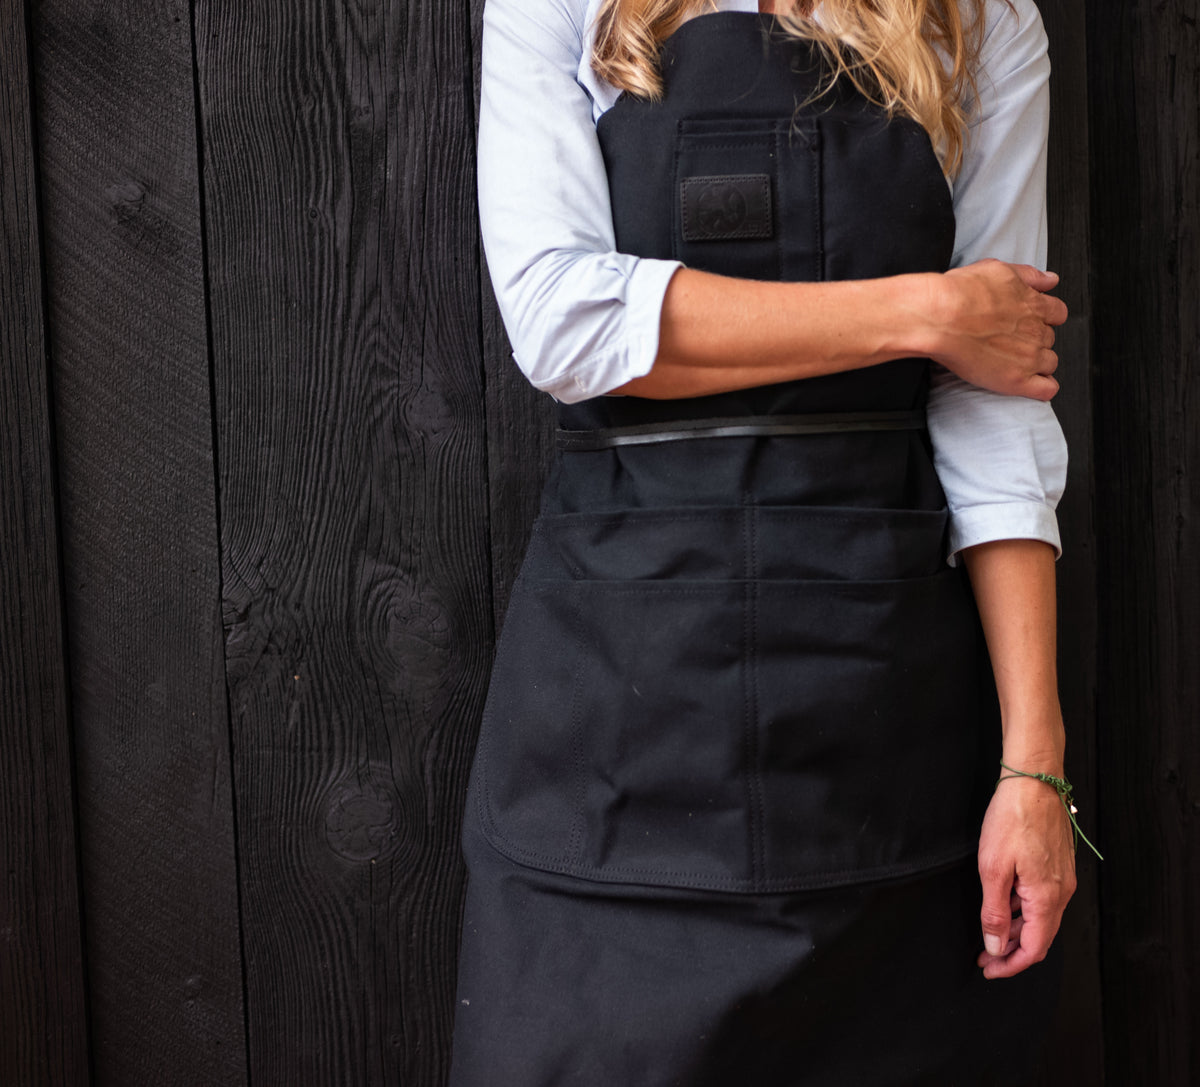 Denim Aprons - Durable, Comfortable, Professional Grade. Many Styles Tagged  Craft_For Chefs - Under NY Sky